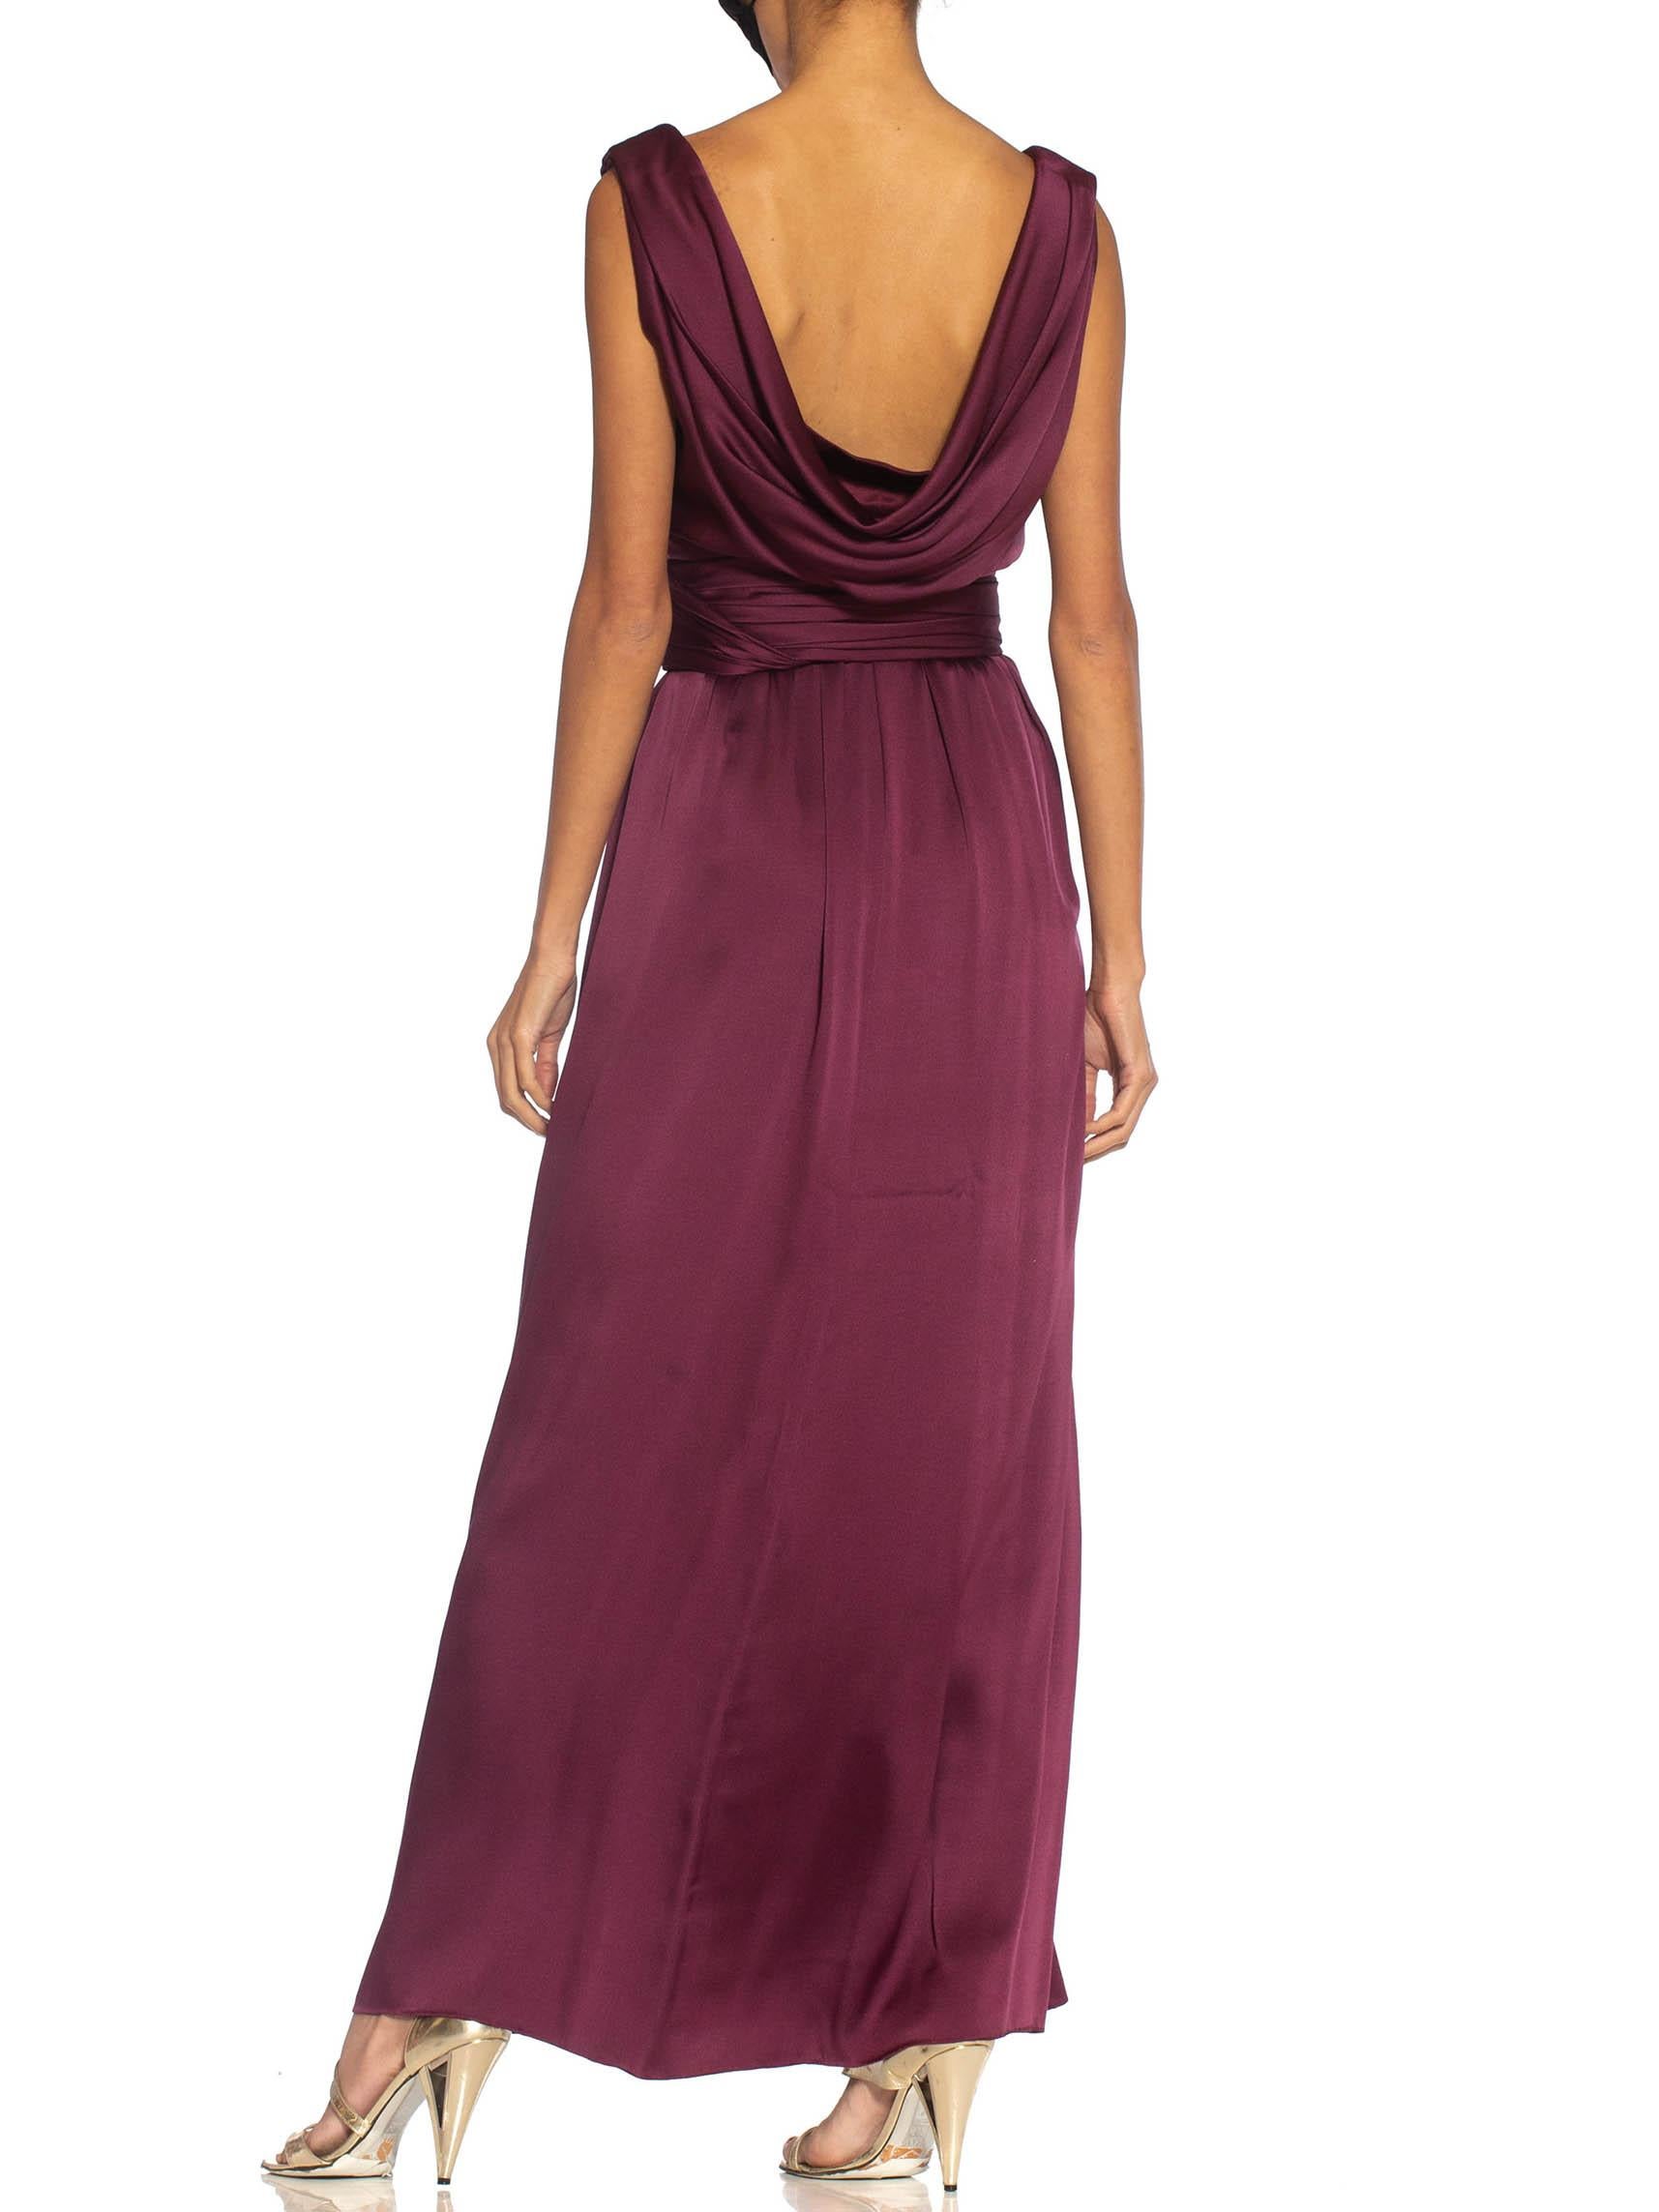 1980S YVES SAINT LAURENT Merlot Haute Couture Silk Satin Draped Gown With Sash  For Sale 2